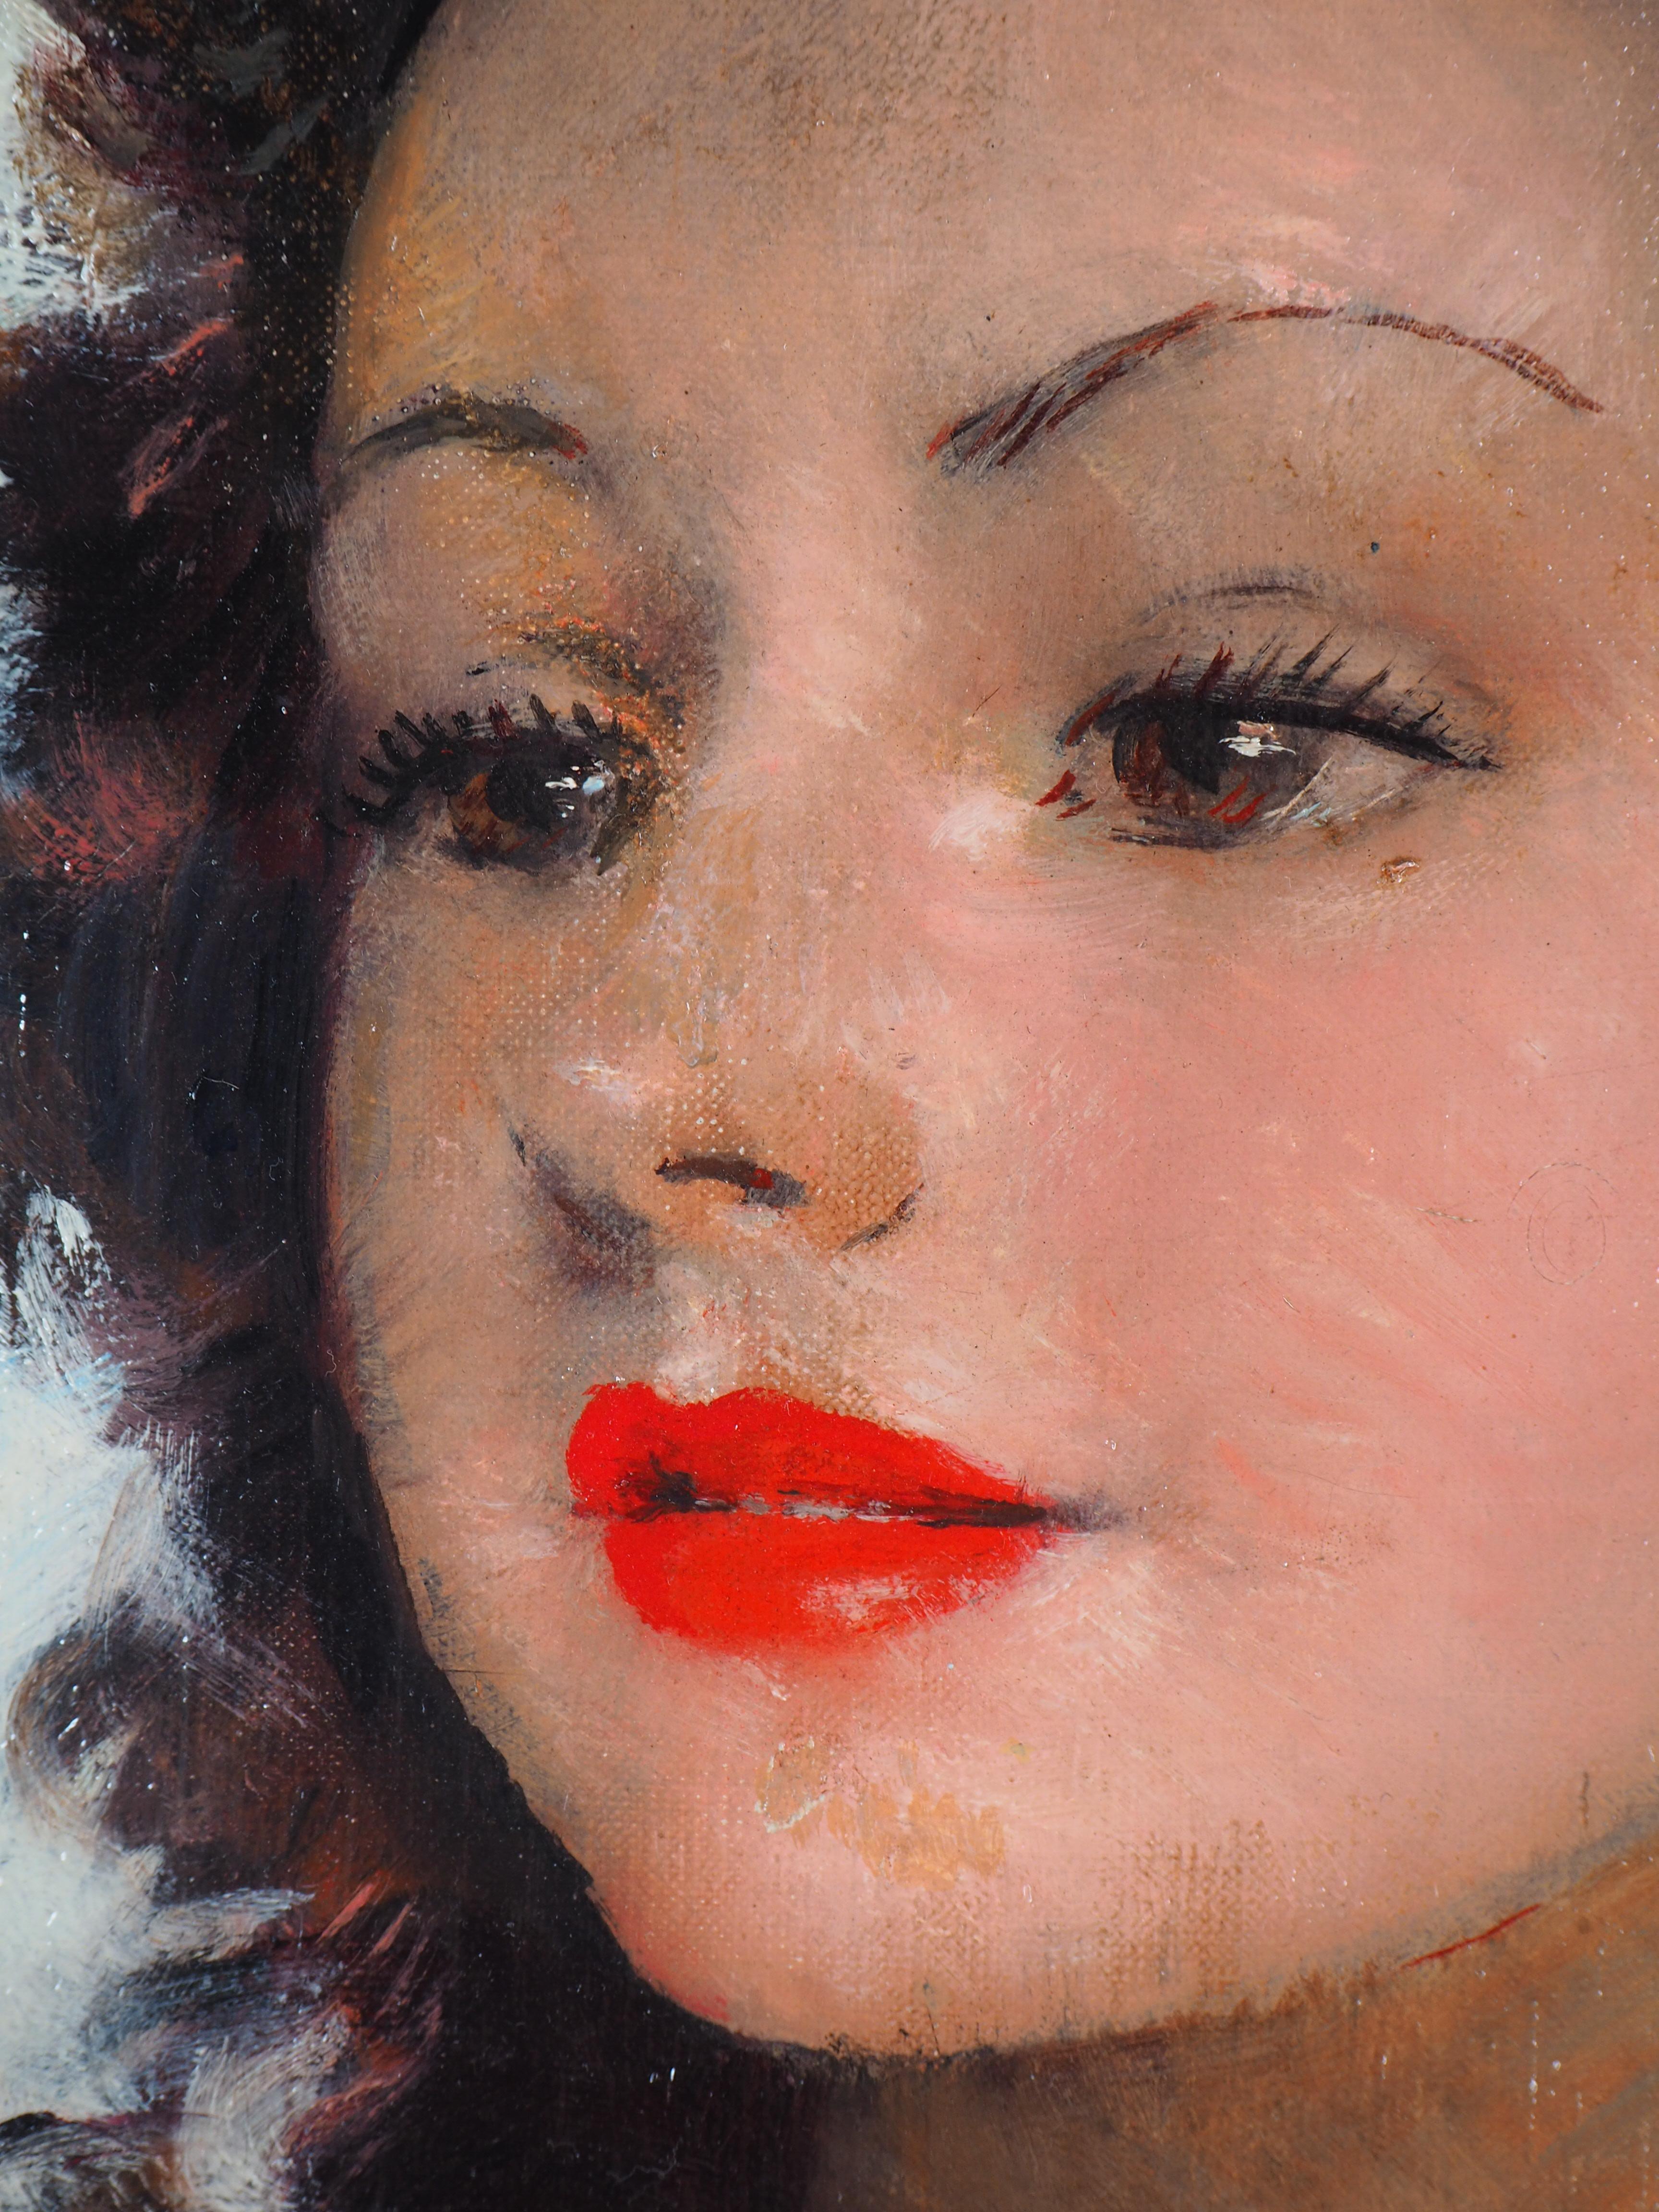 The Red Lipstick : Smiling Model - Original handsigned Oil on Canvas - Modern Painting by Jean-Gabriel Domergue